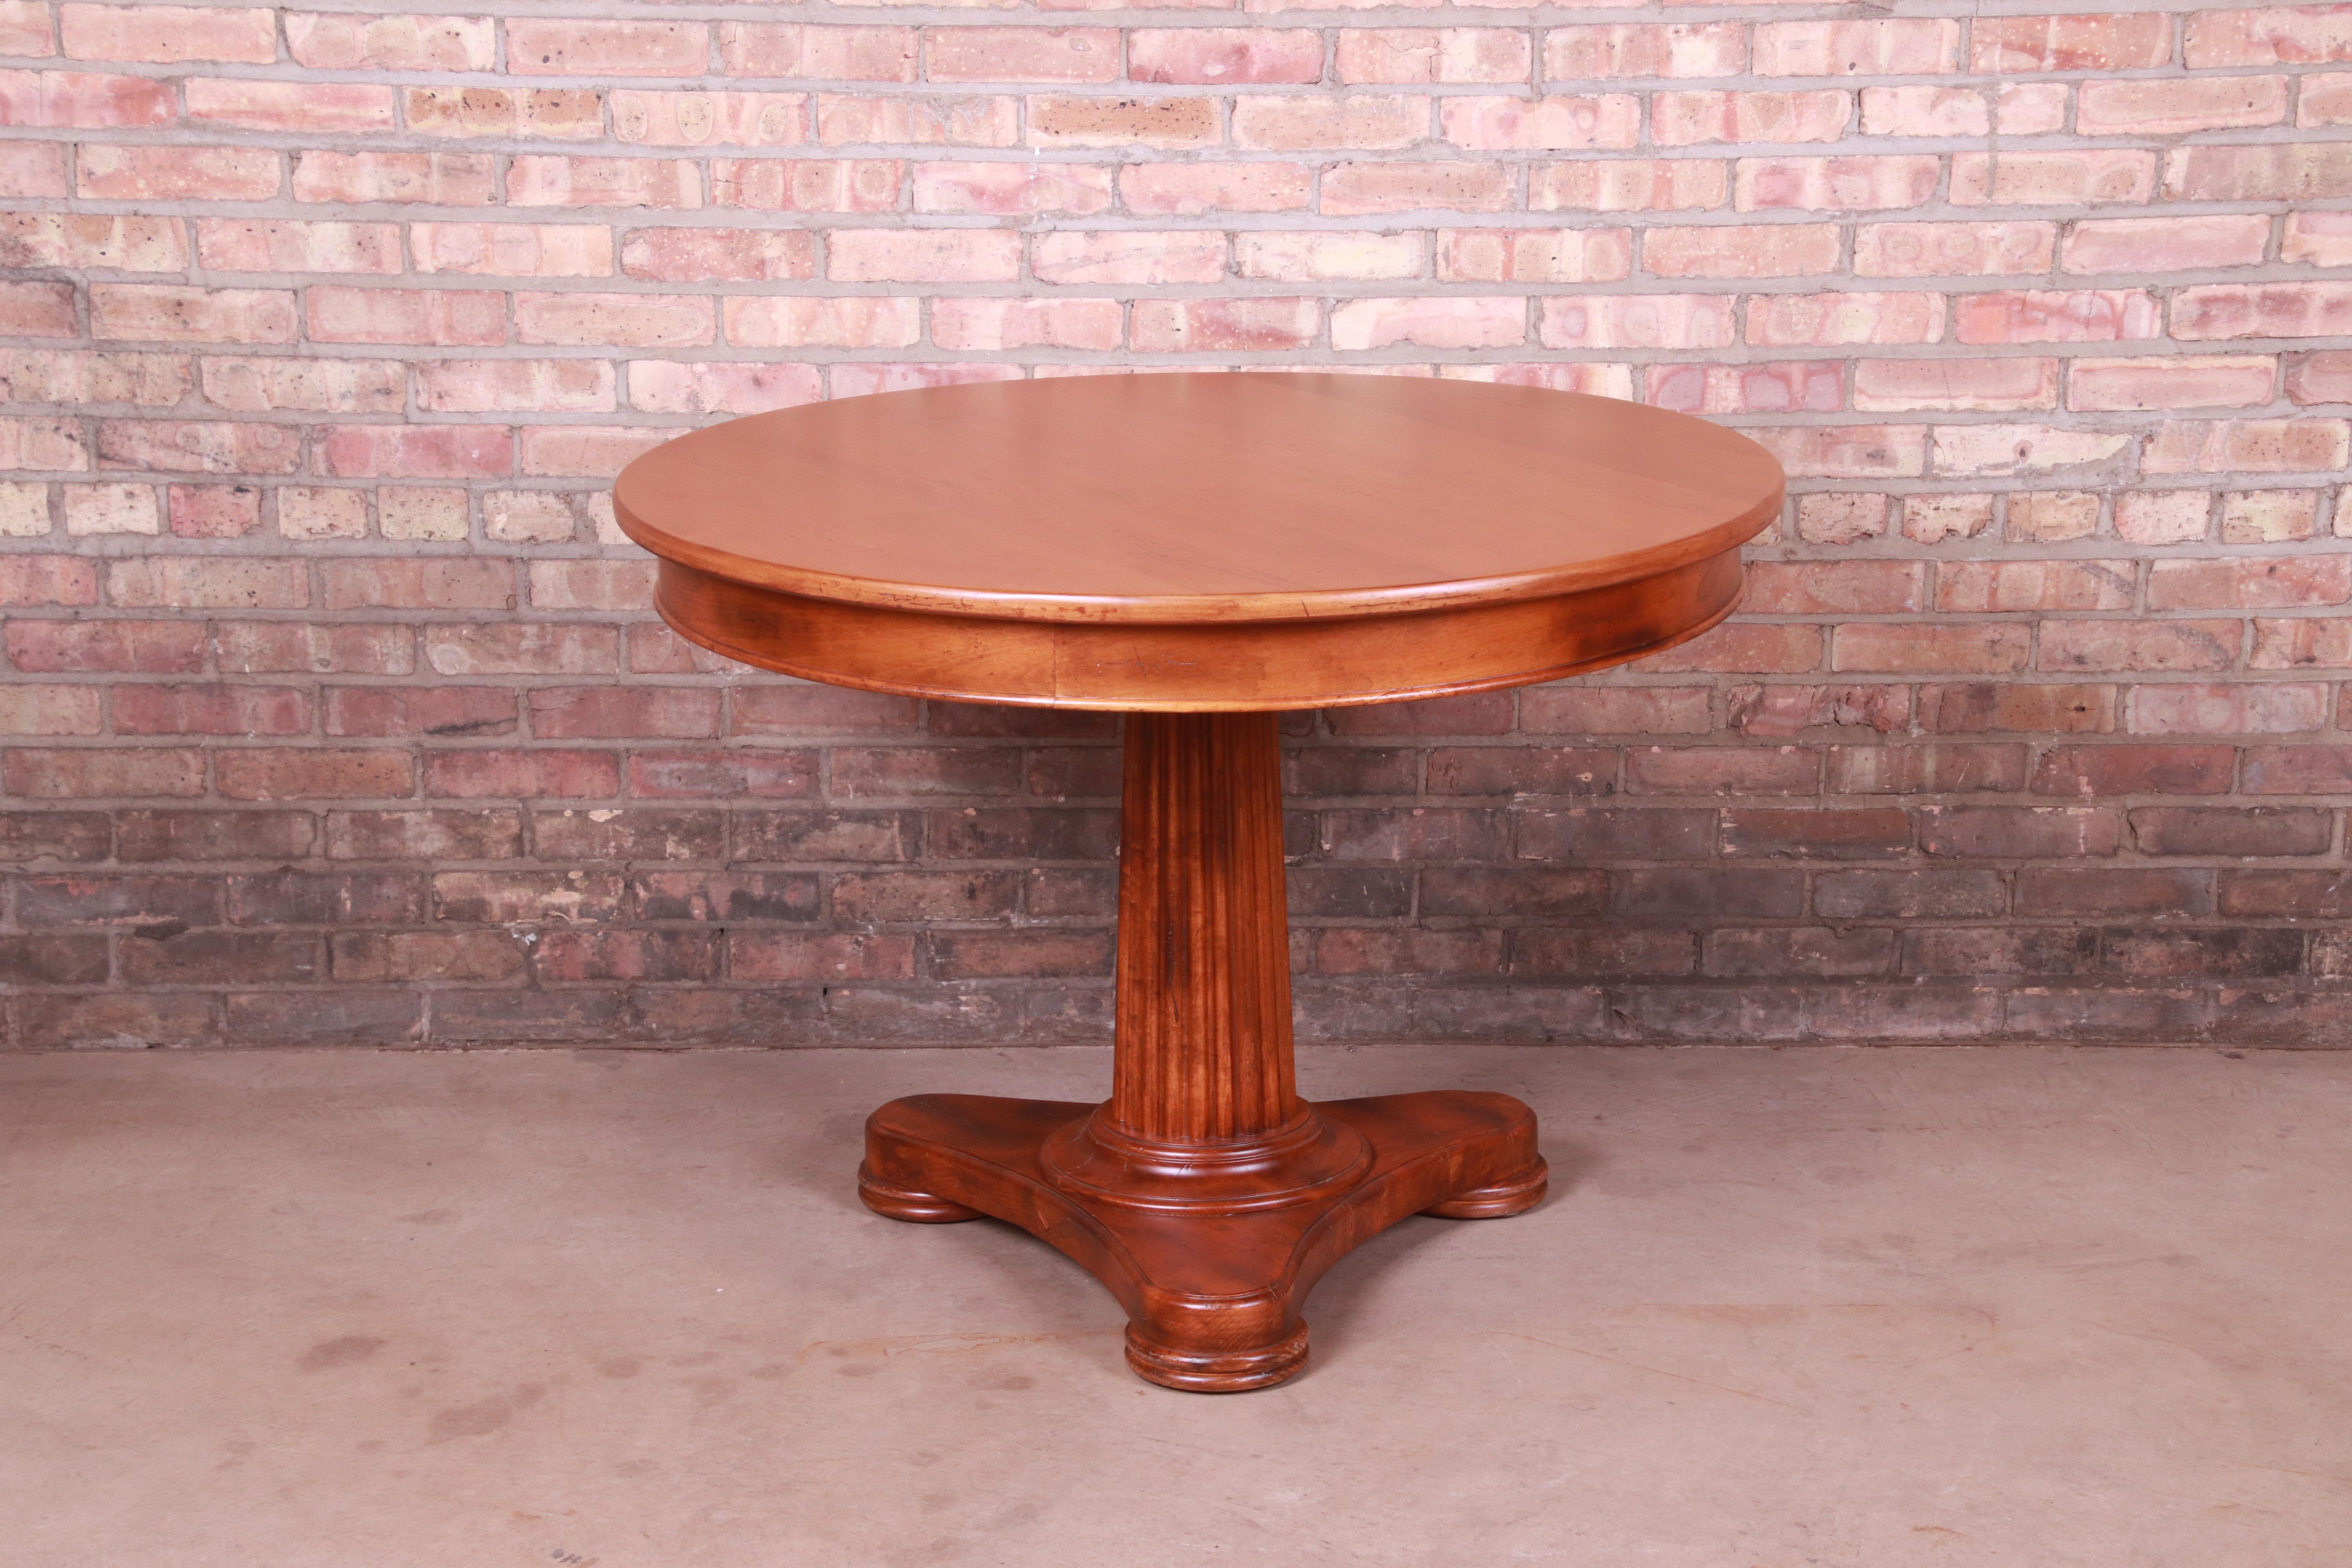 A gorgeous Italian Empire or Neoclassical style round pedestal breakfast table, game table, or center table

By Baker Furniture, 